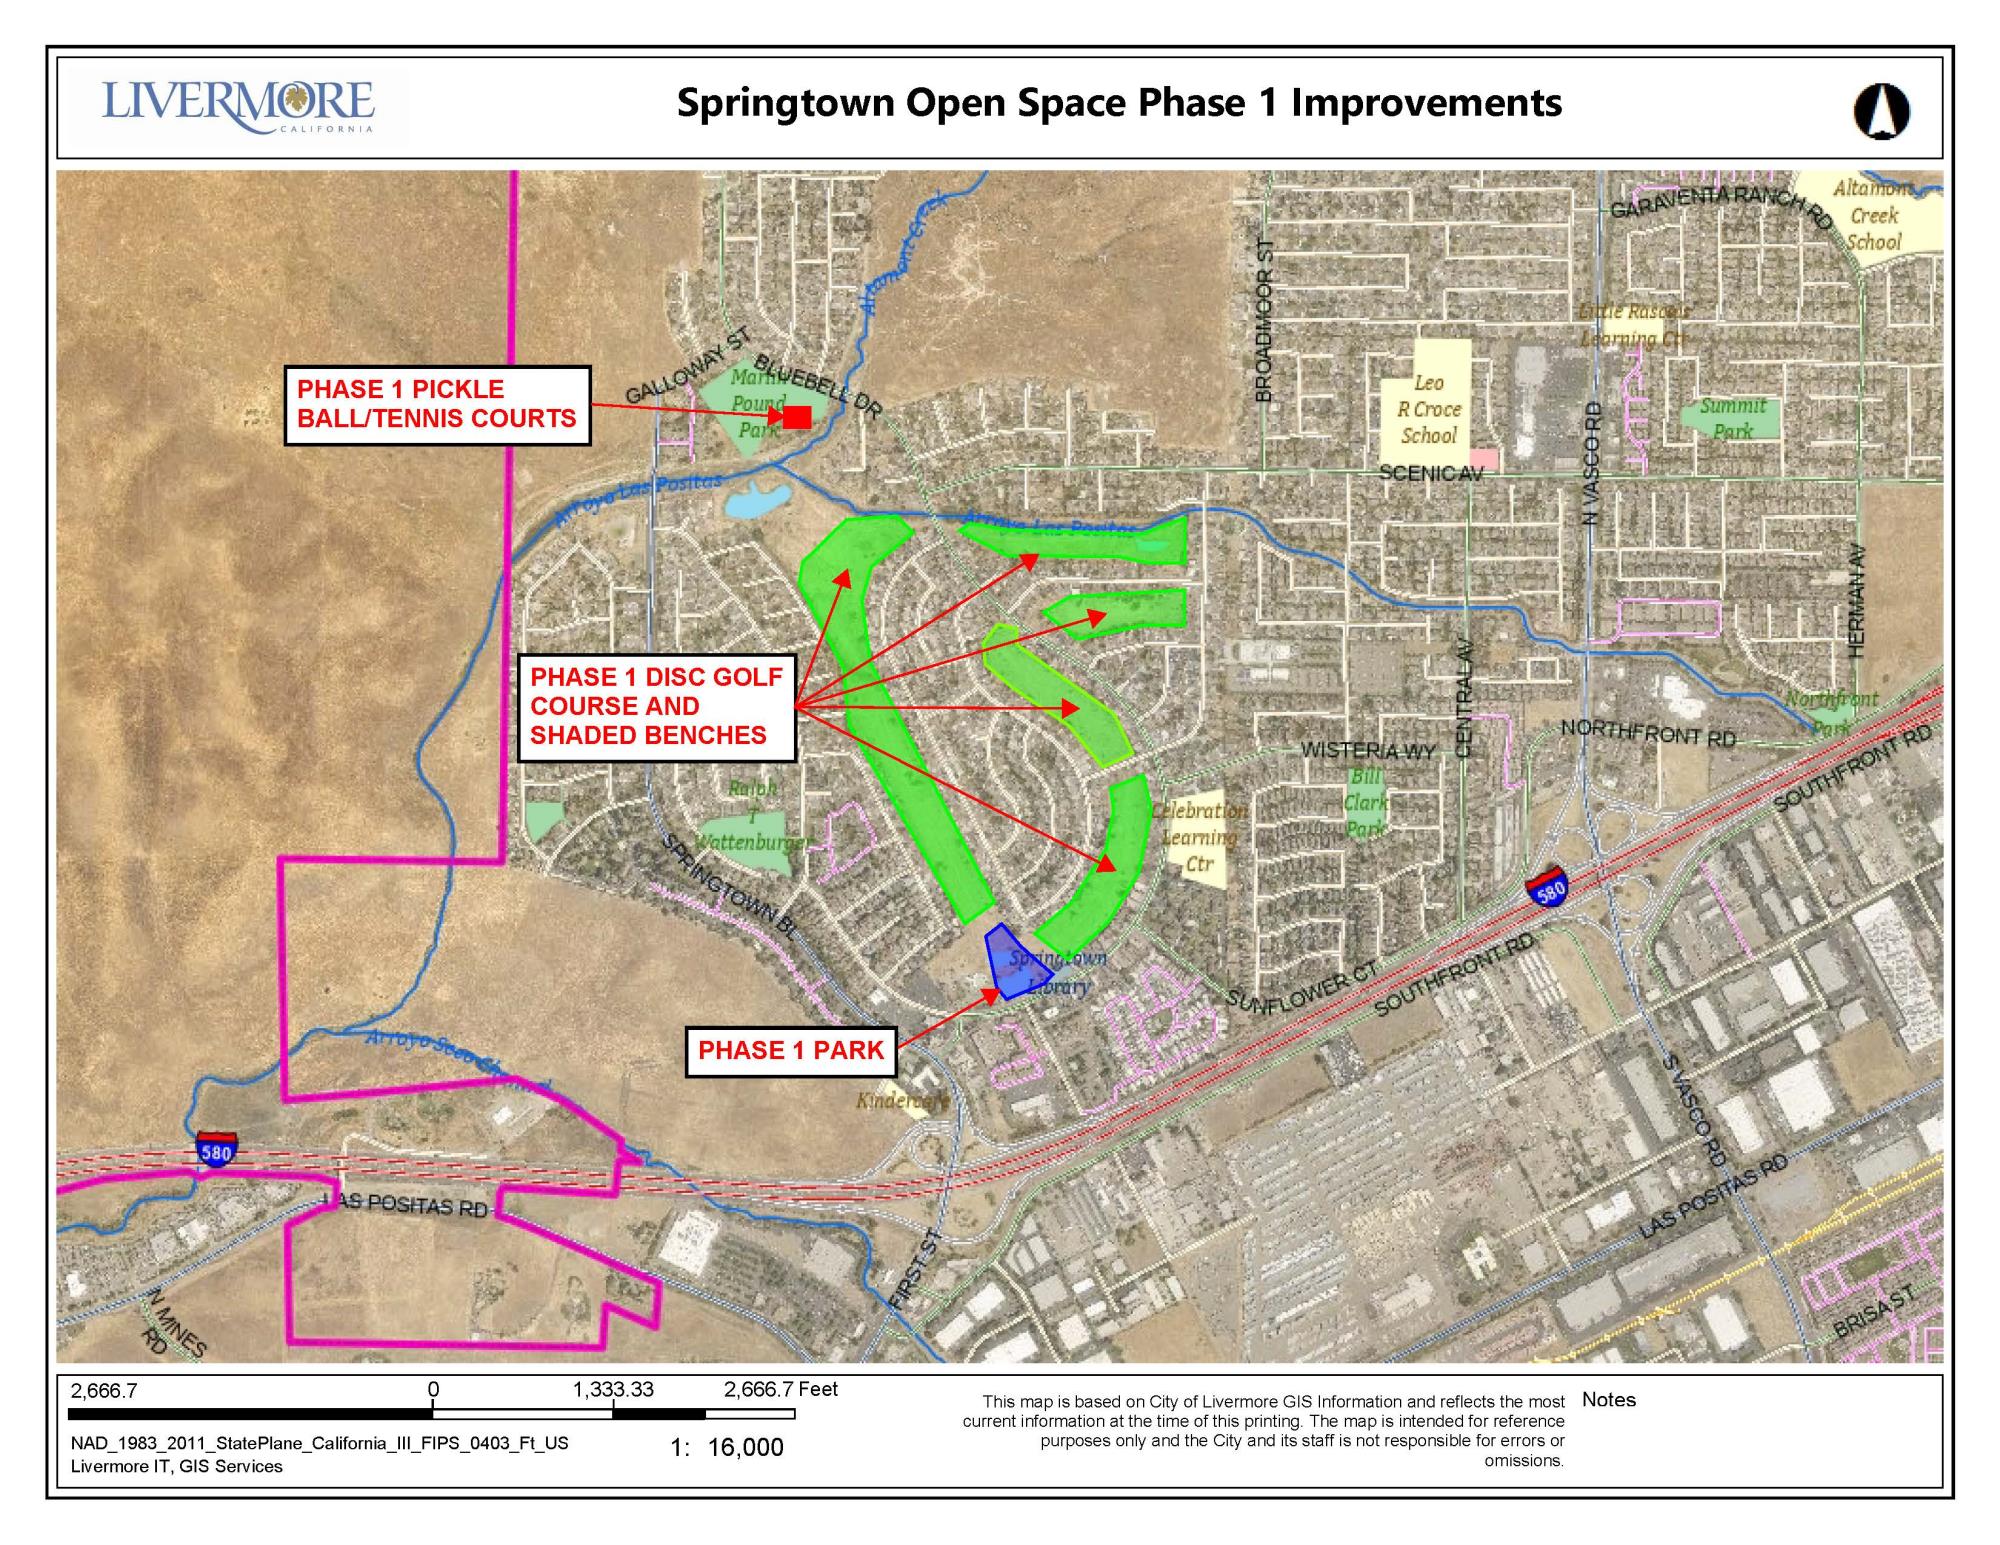 Springtown Open Space Phase 1 Improvements Location Map